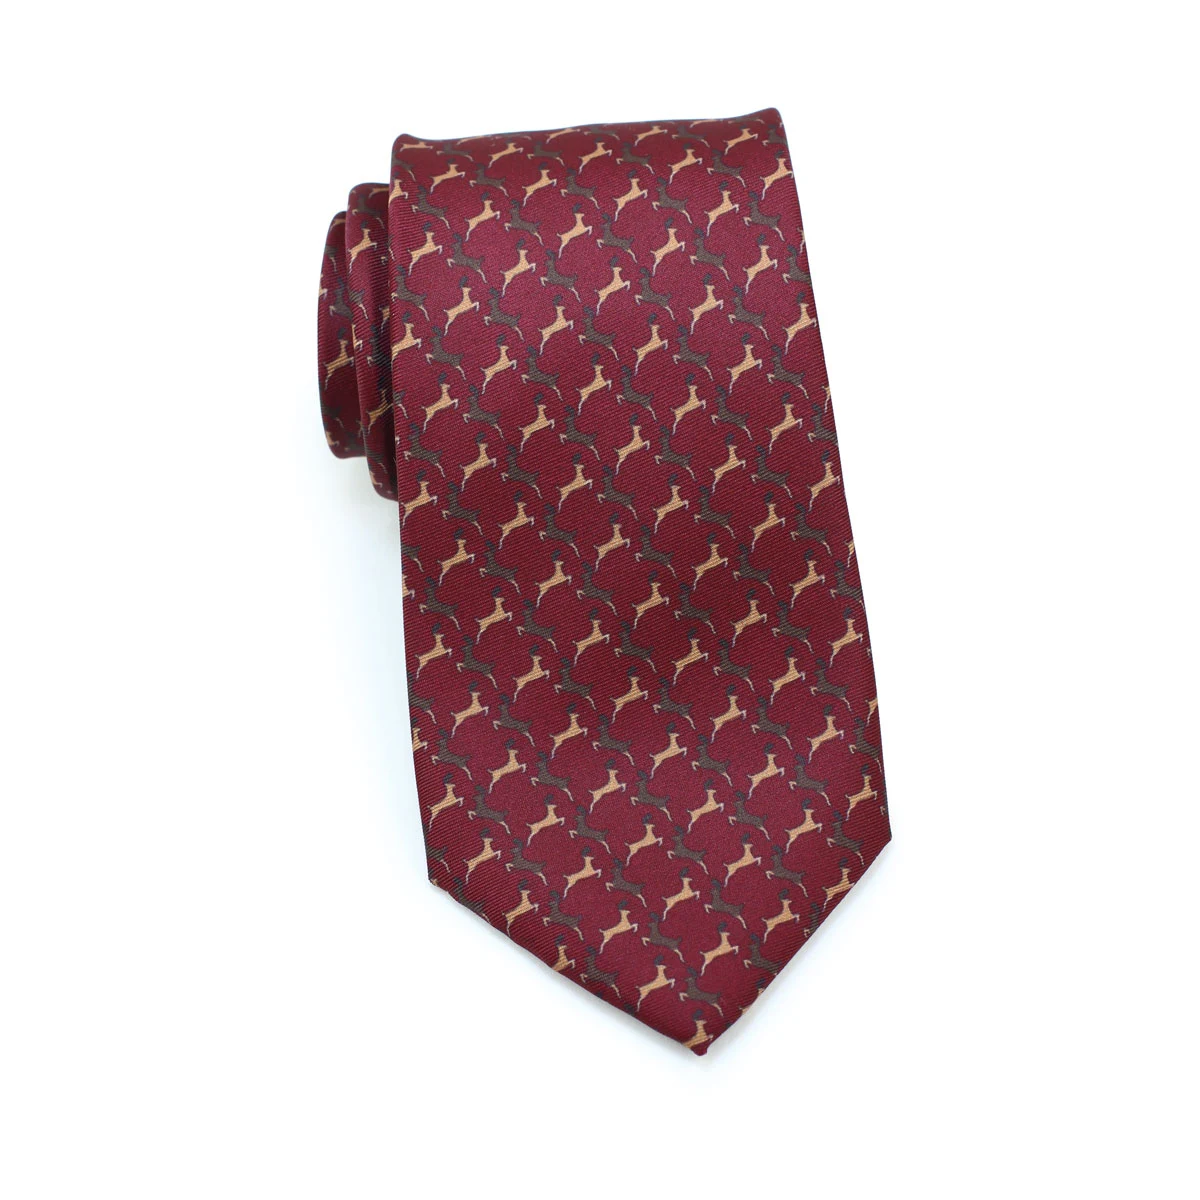 Christmas neck tie in cherry red